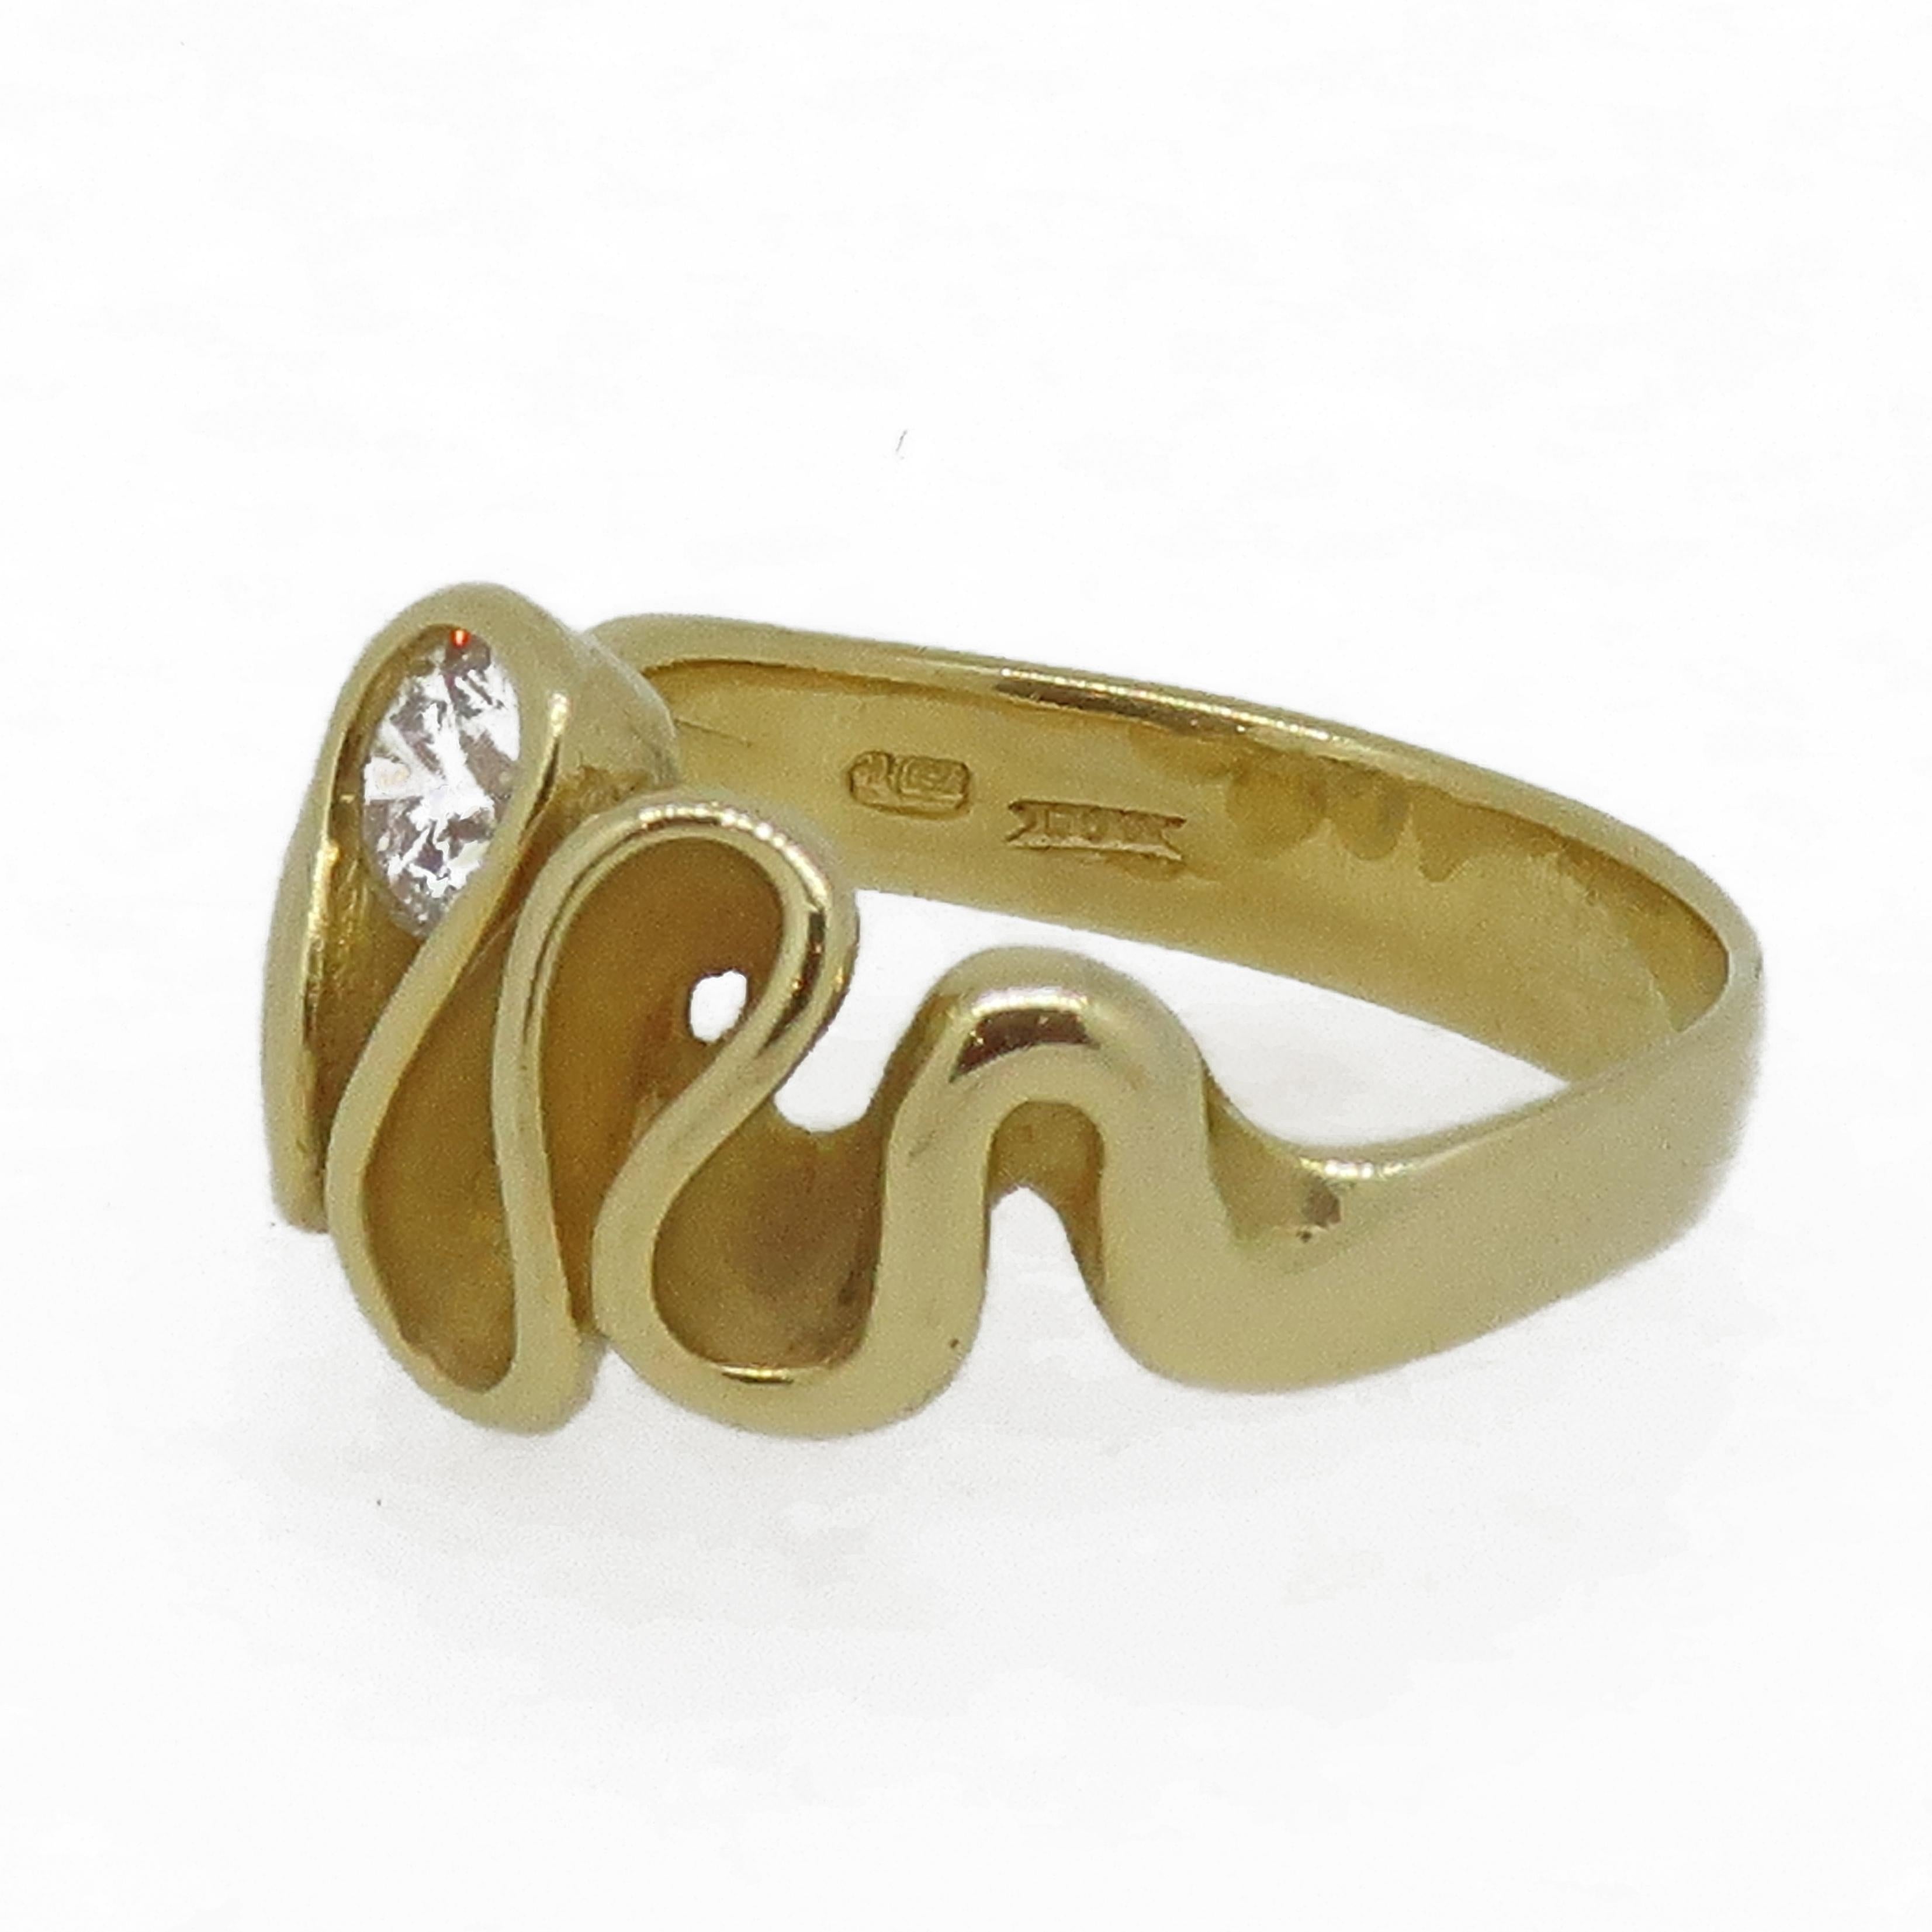 Swirl Diamond Solitaire Ring 18 Karat Yellow Gold

A different and stand out brilliant cut diamond ring. The round brilliant cut diamond is set in a swirl of gold, on a wide 18ct yellow gold shank. This is a very unusual and striking design and one